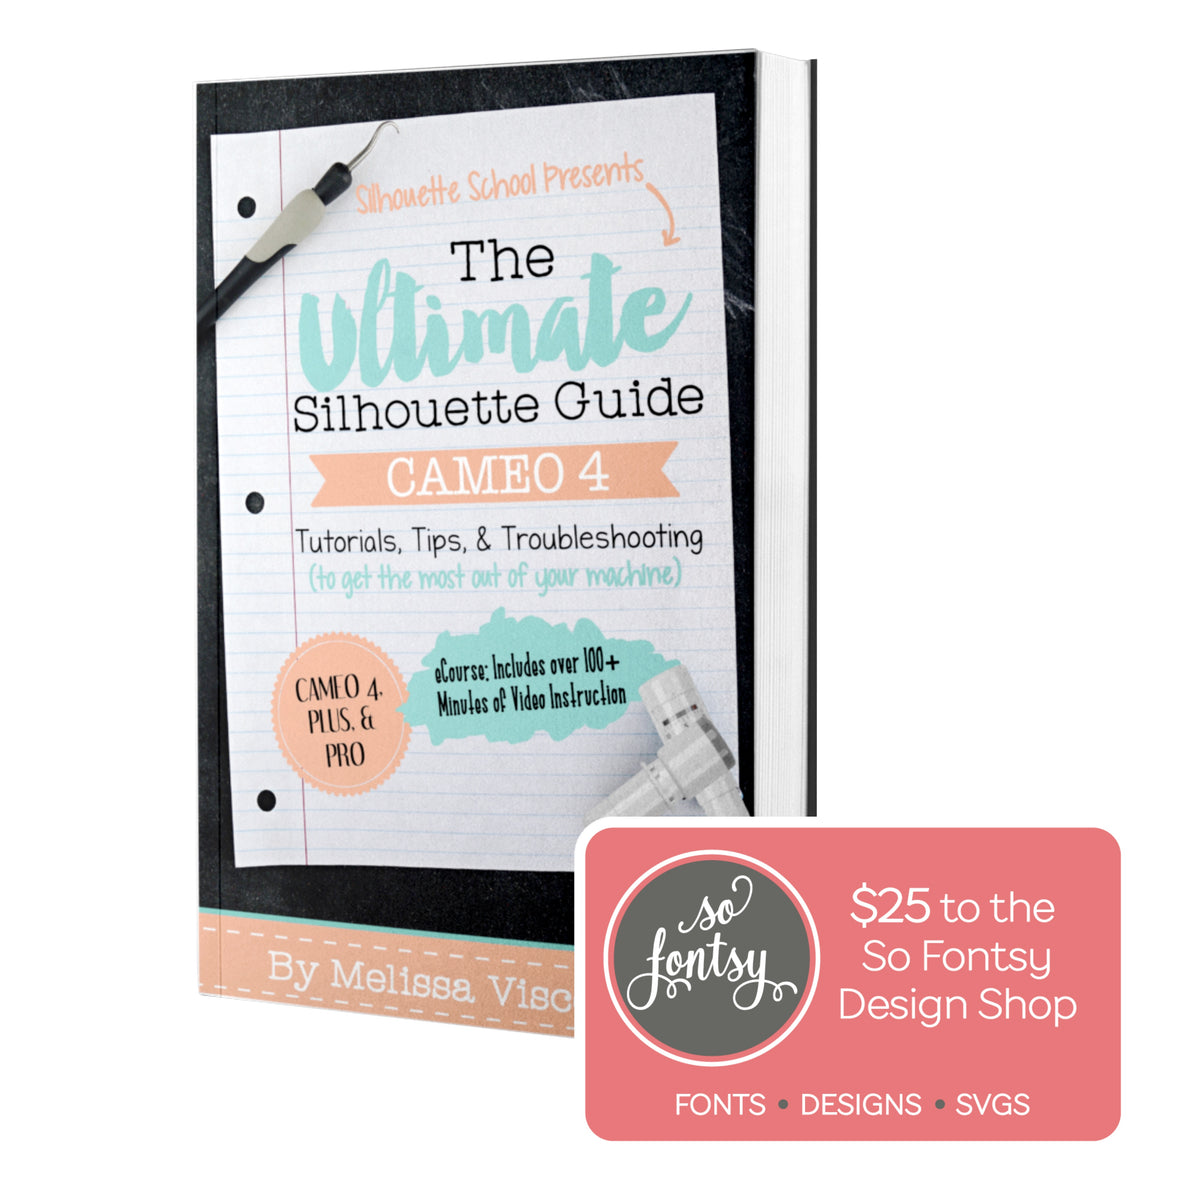 Silhouette CAMEO 4 Tools: What Blades are Included? - Silhouette School